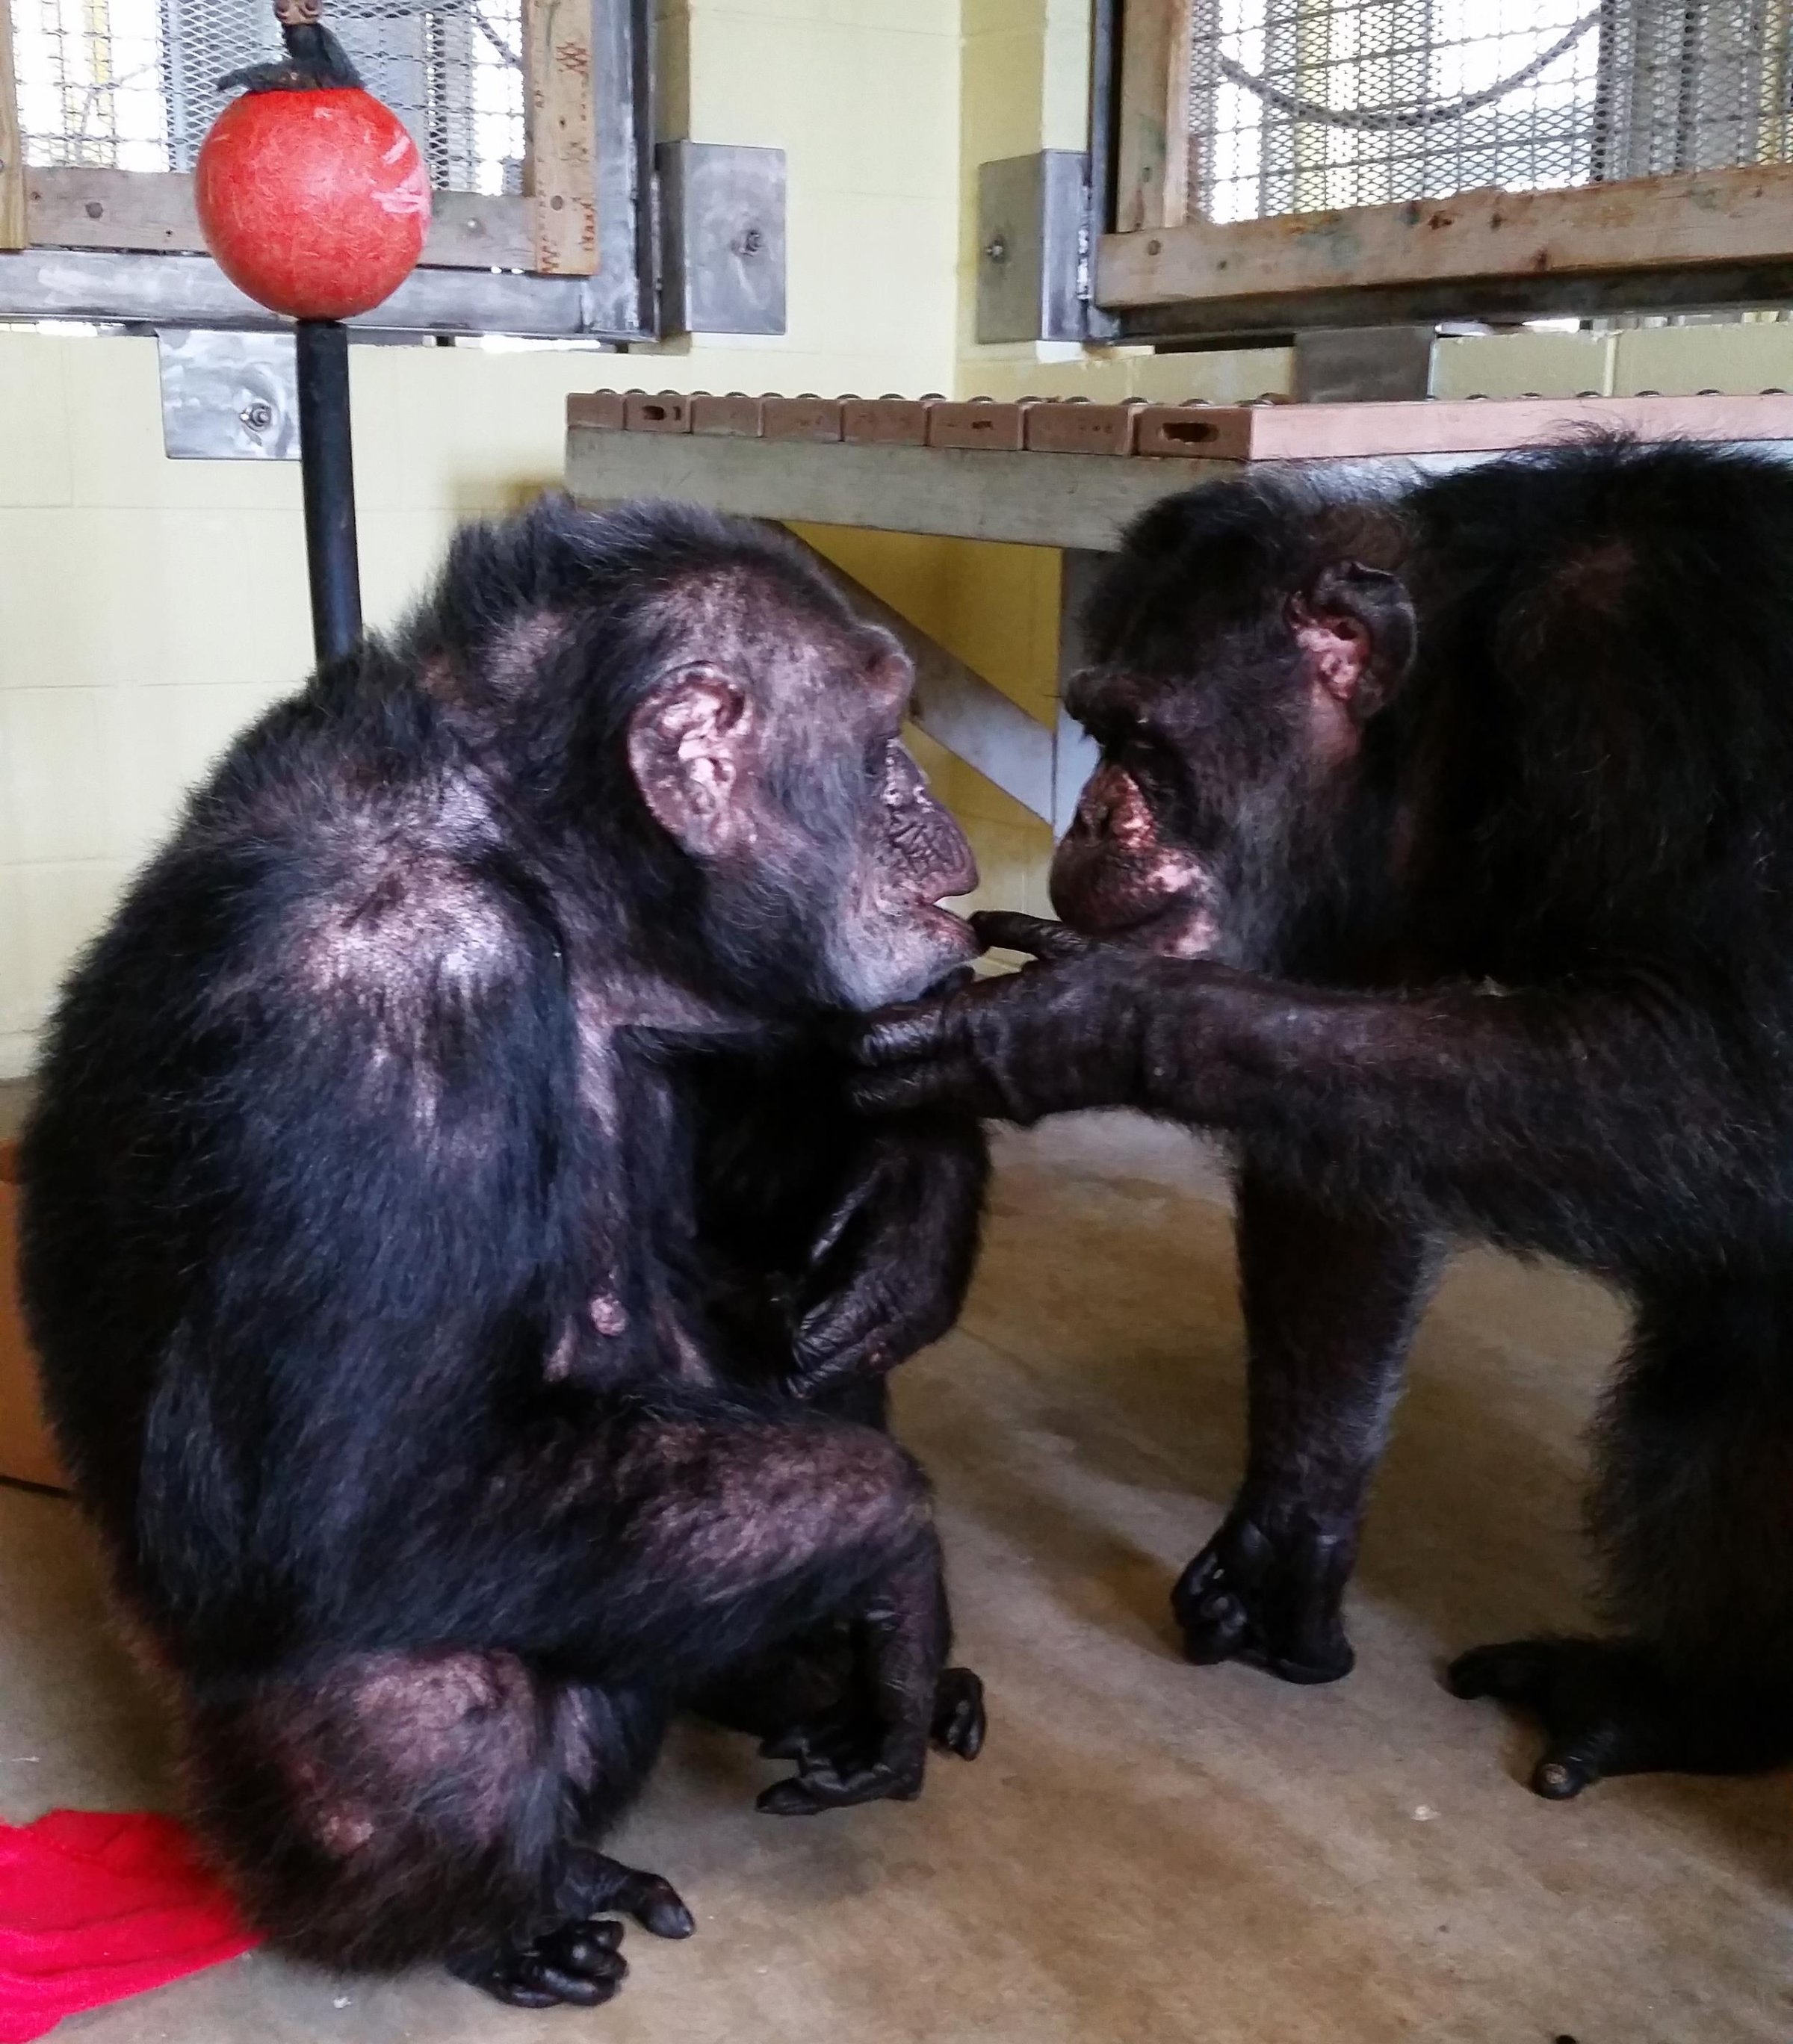 Iris, who did not have any chimp friends at a Georgia zoo, meets her new pal Abdul at the Florida sanctuary she now calls home.